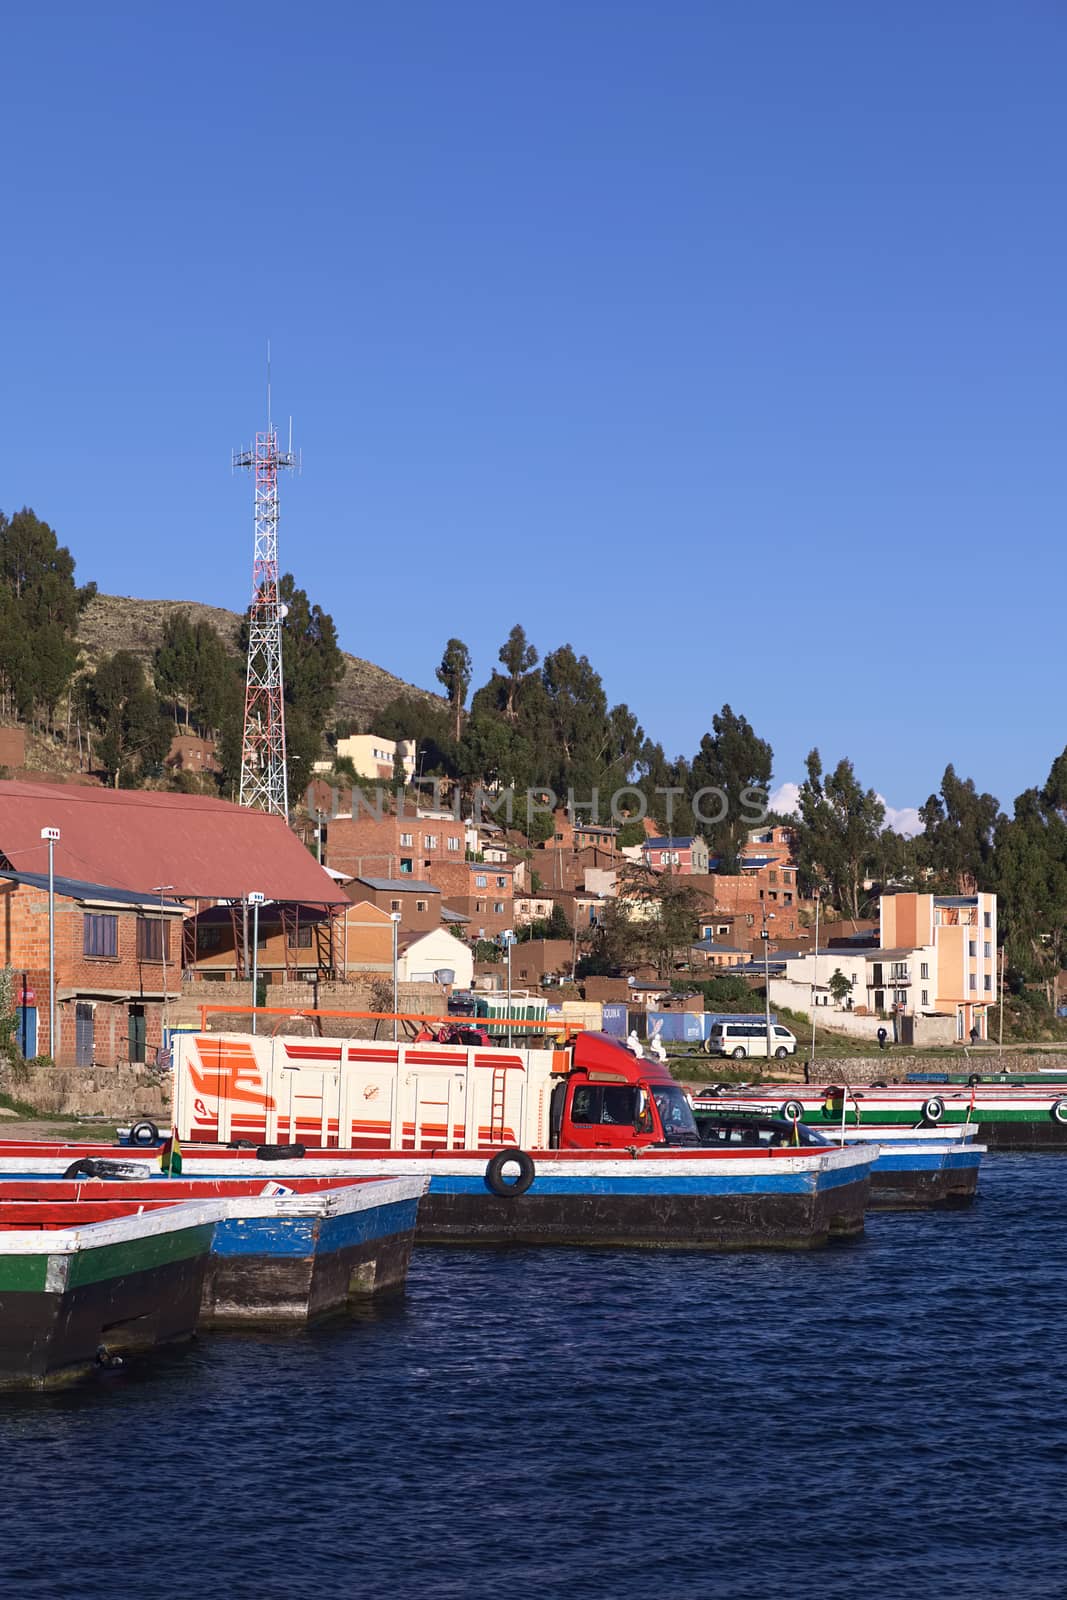 TIQUINA, BOLIVIA - OCTOBER 16, 2014: Truck on wooden ferry waiting to be transported over the Strait of Tiquina at Lake Titicaca on October 16, 2014 in San Pablo de Tiquina, Bolivia